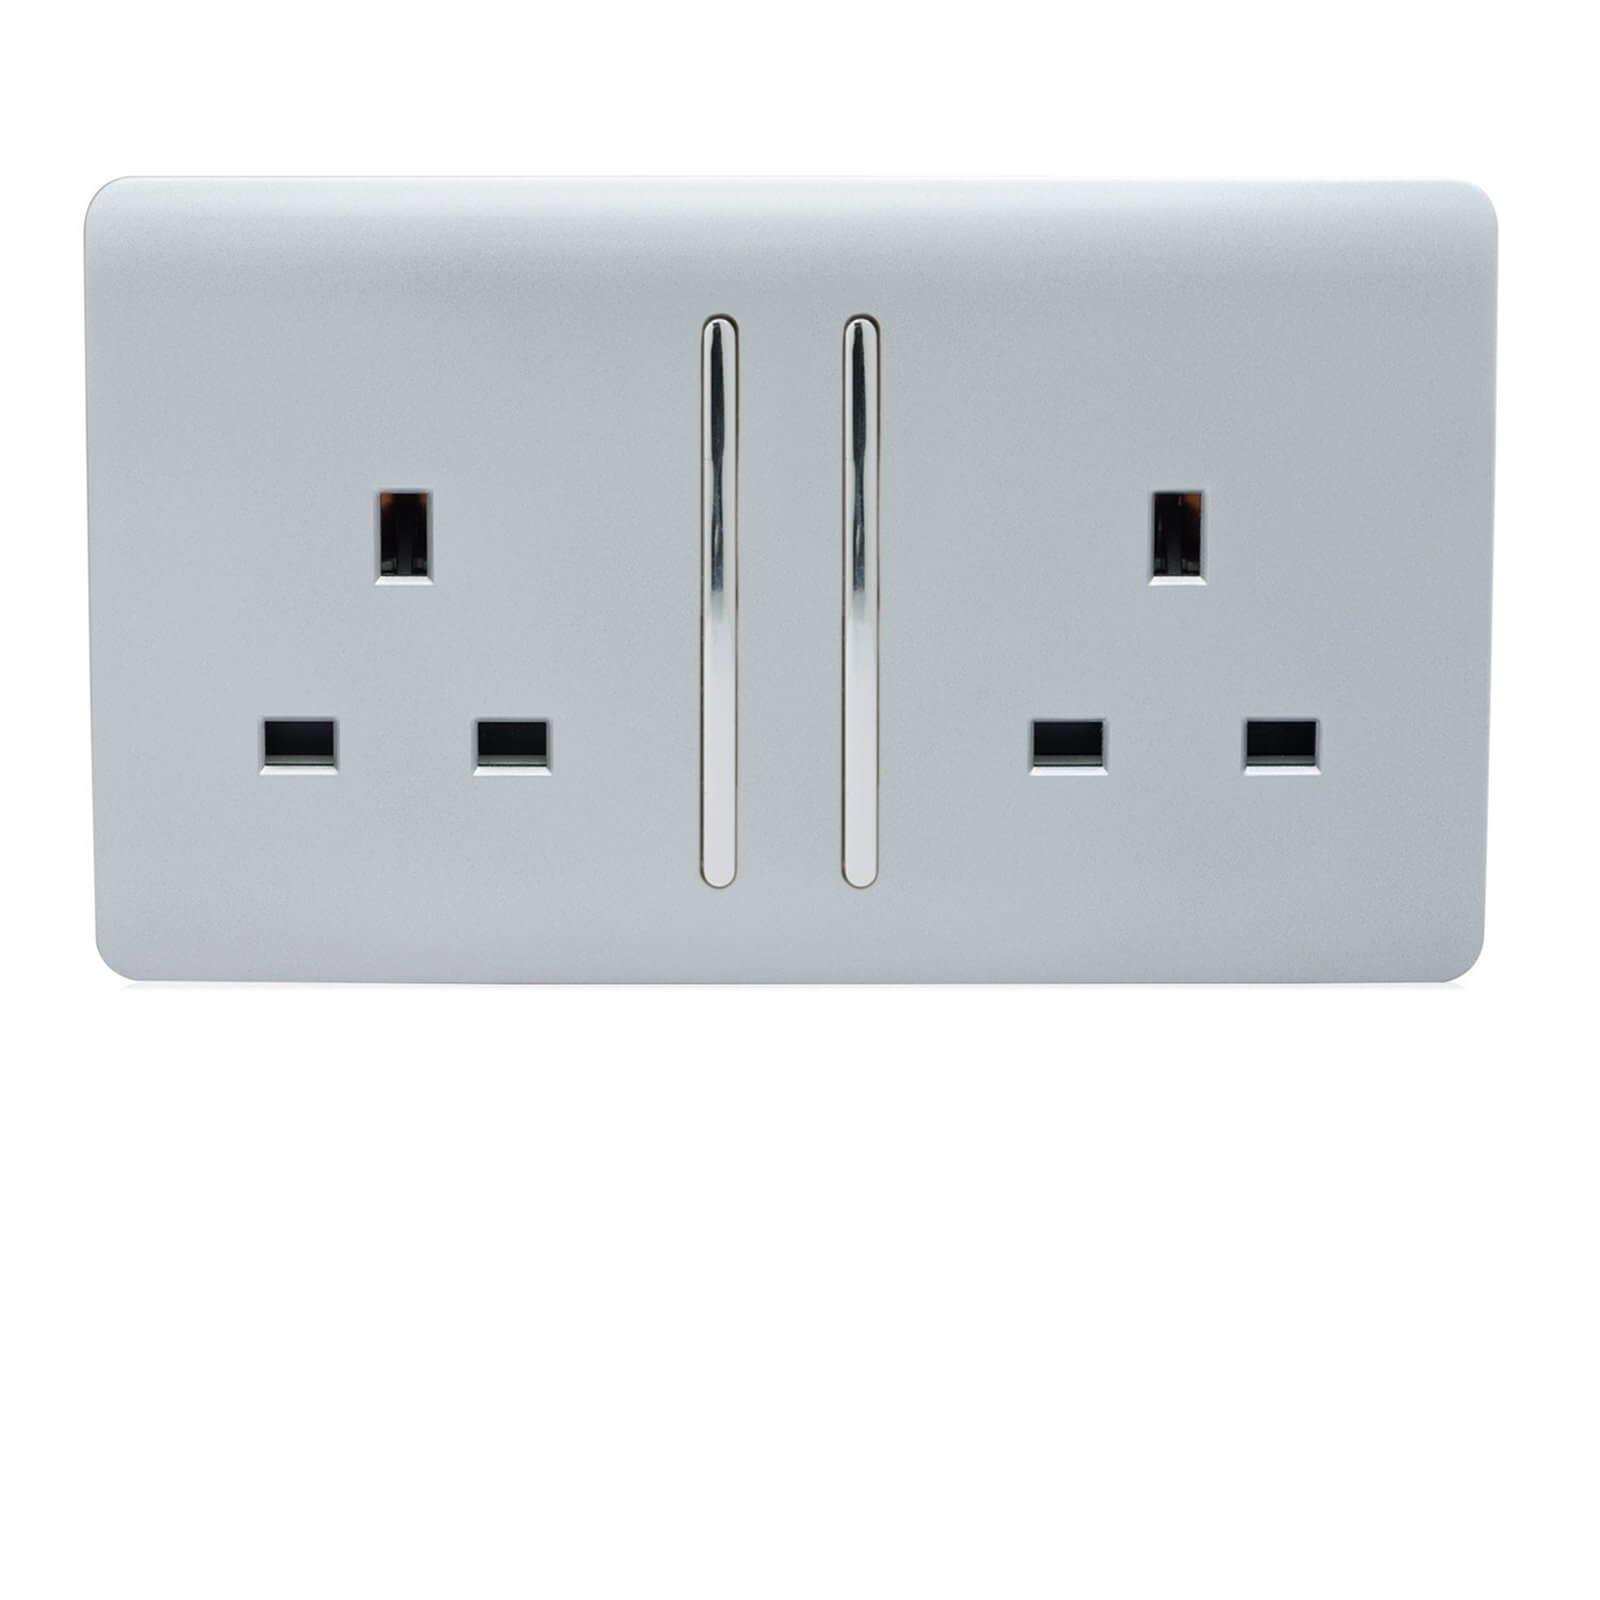 Trendi Switch 2 Gang 13 amp long switched Plug Socket in Screwless Silver